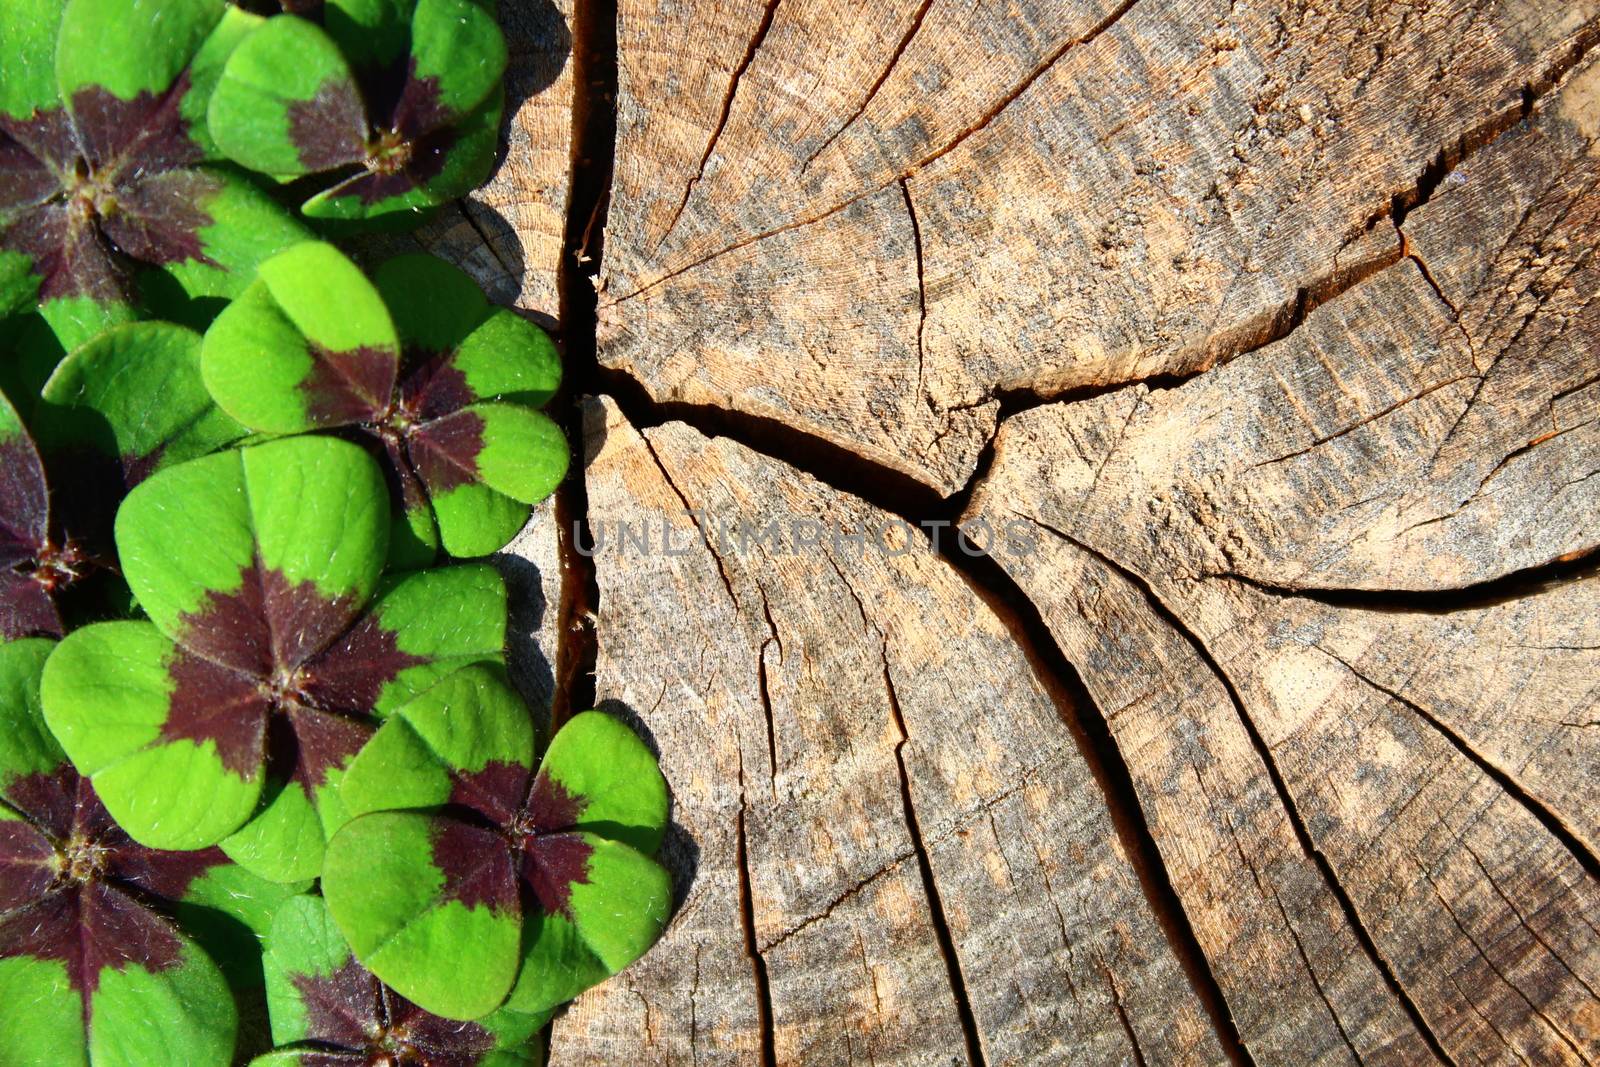 The picture shows a lucky clover border on a wooden background.